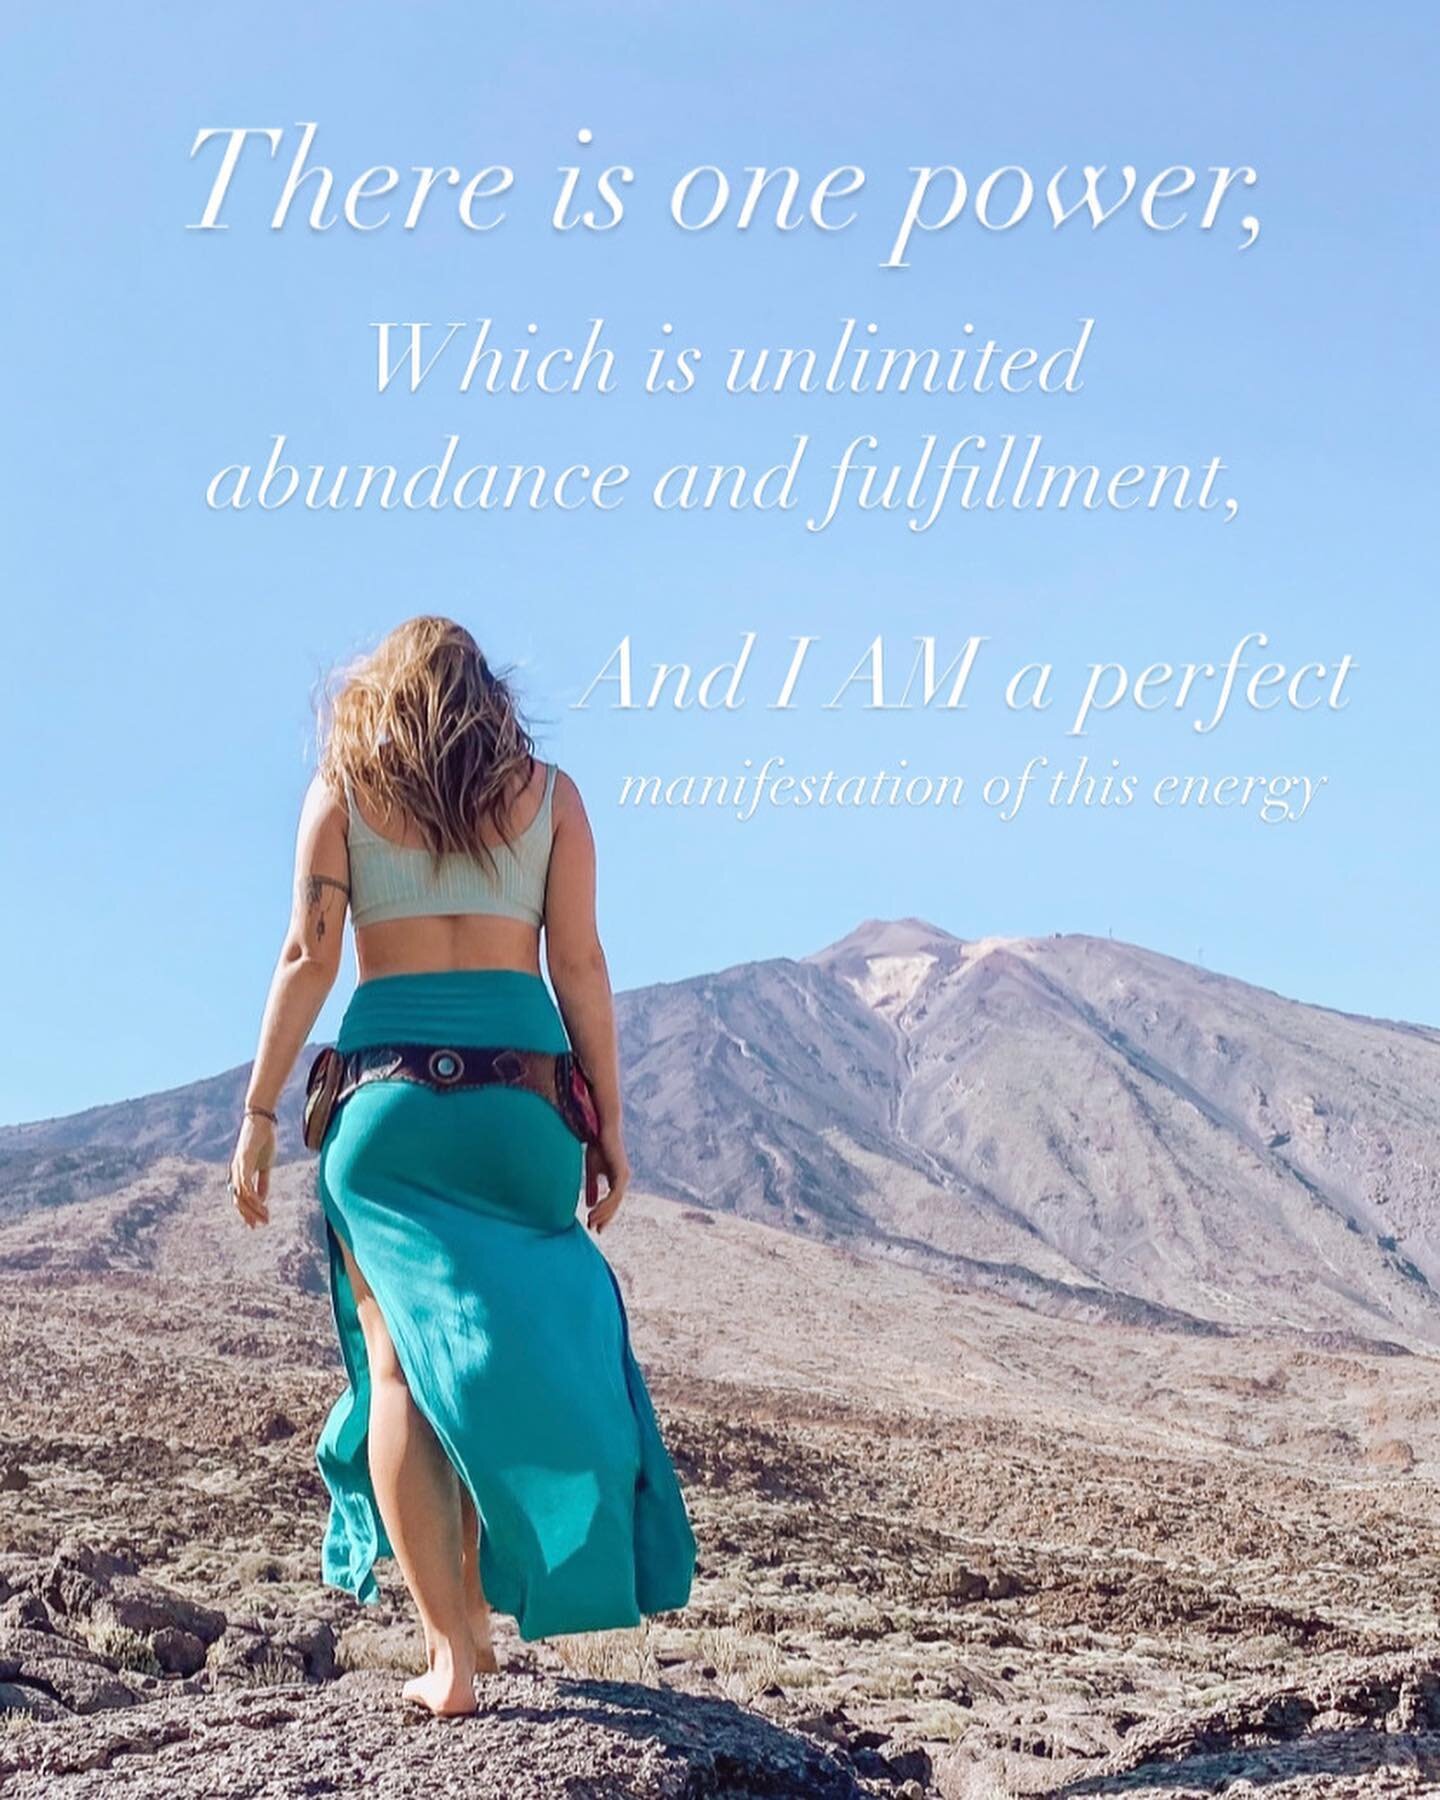 &quot;There is one power, 
Which is unlimited abundance and fulfillment,
And I AM a perfect manifestation of this energy,

The power working for me, through me, and as me,
Provides for me all the abundance and fulfillment ,
That I AM now.

I draw to 